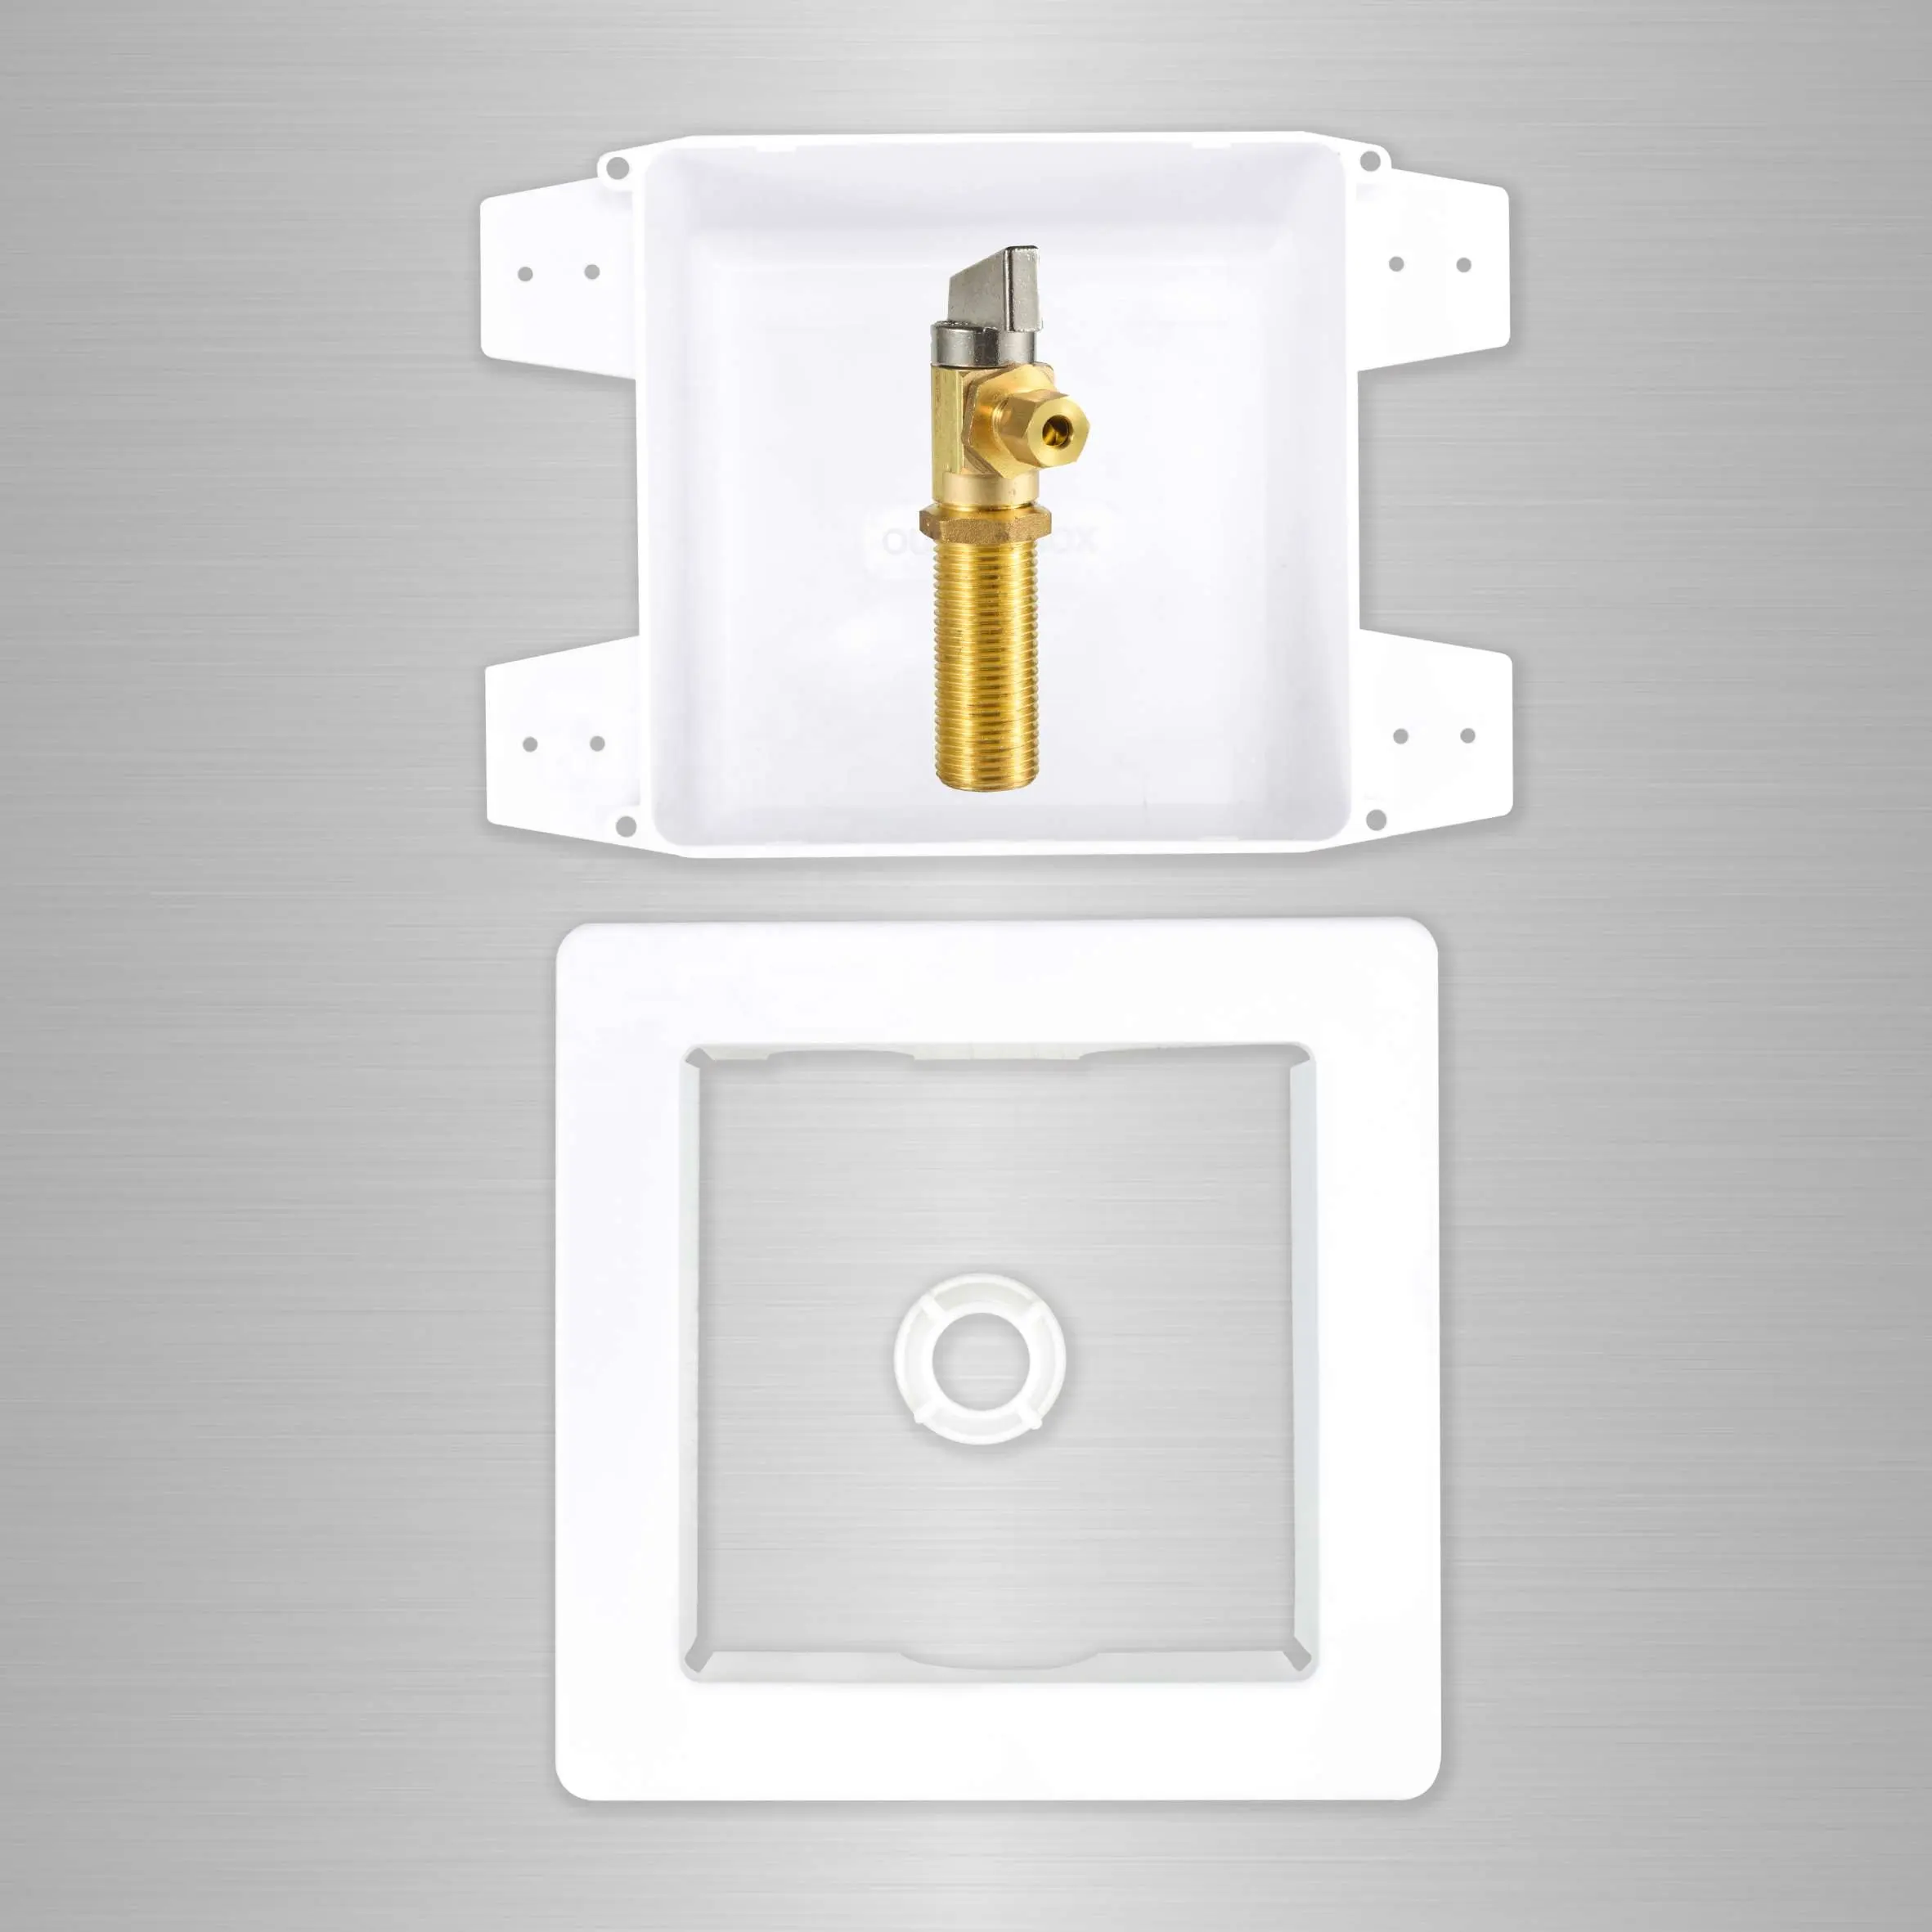 Lead Free Ice Maker Outlet Box with Valve half inch MIP x a quarter inch OD Comp